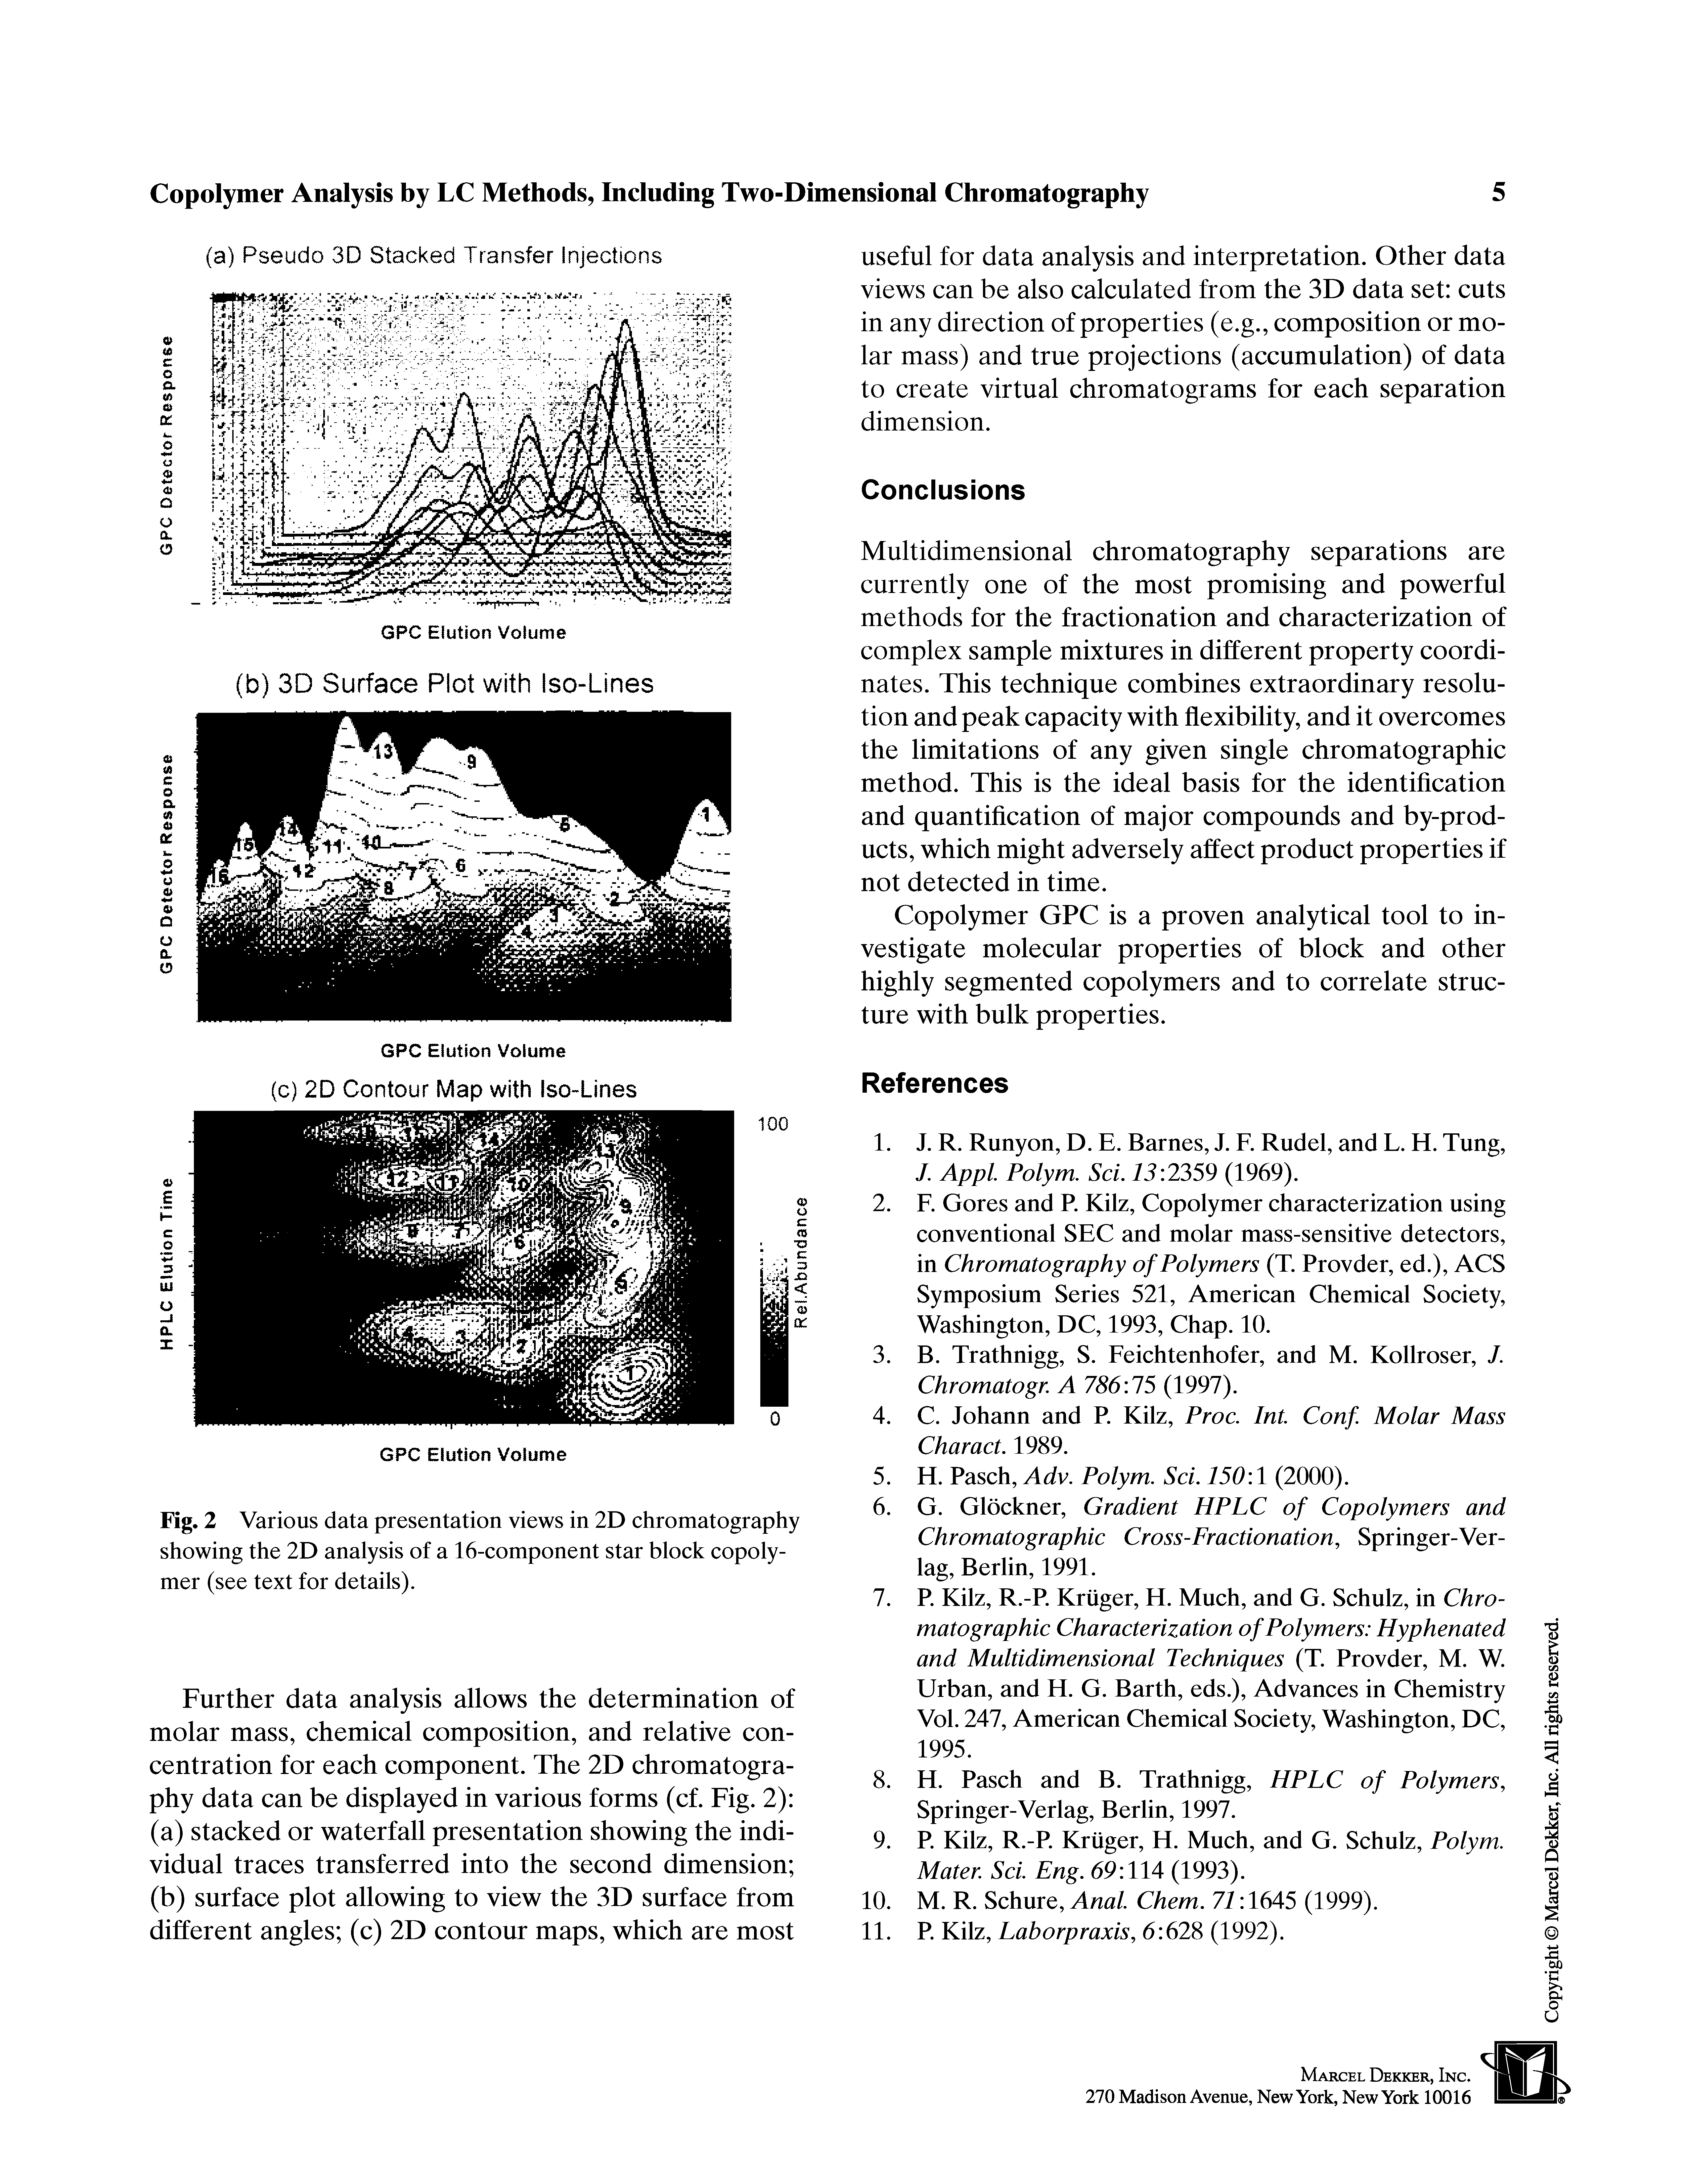 Fig. 2 Various data presentation views in 2D chromatography showing the 2D analysis of a 16-component star block copolymer (see text for details).